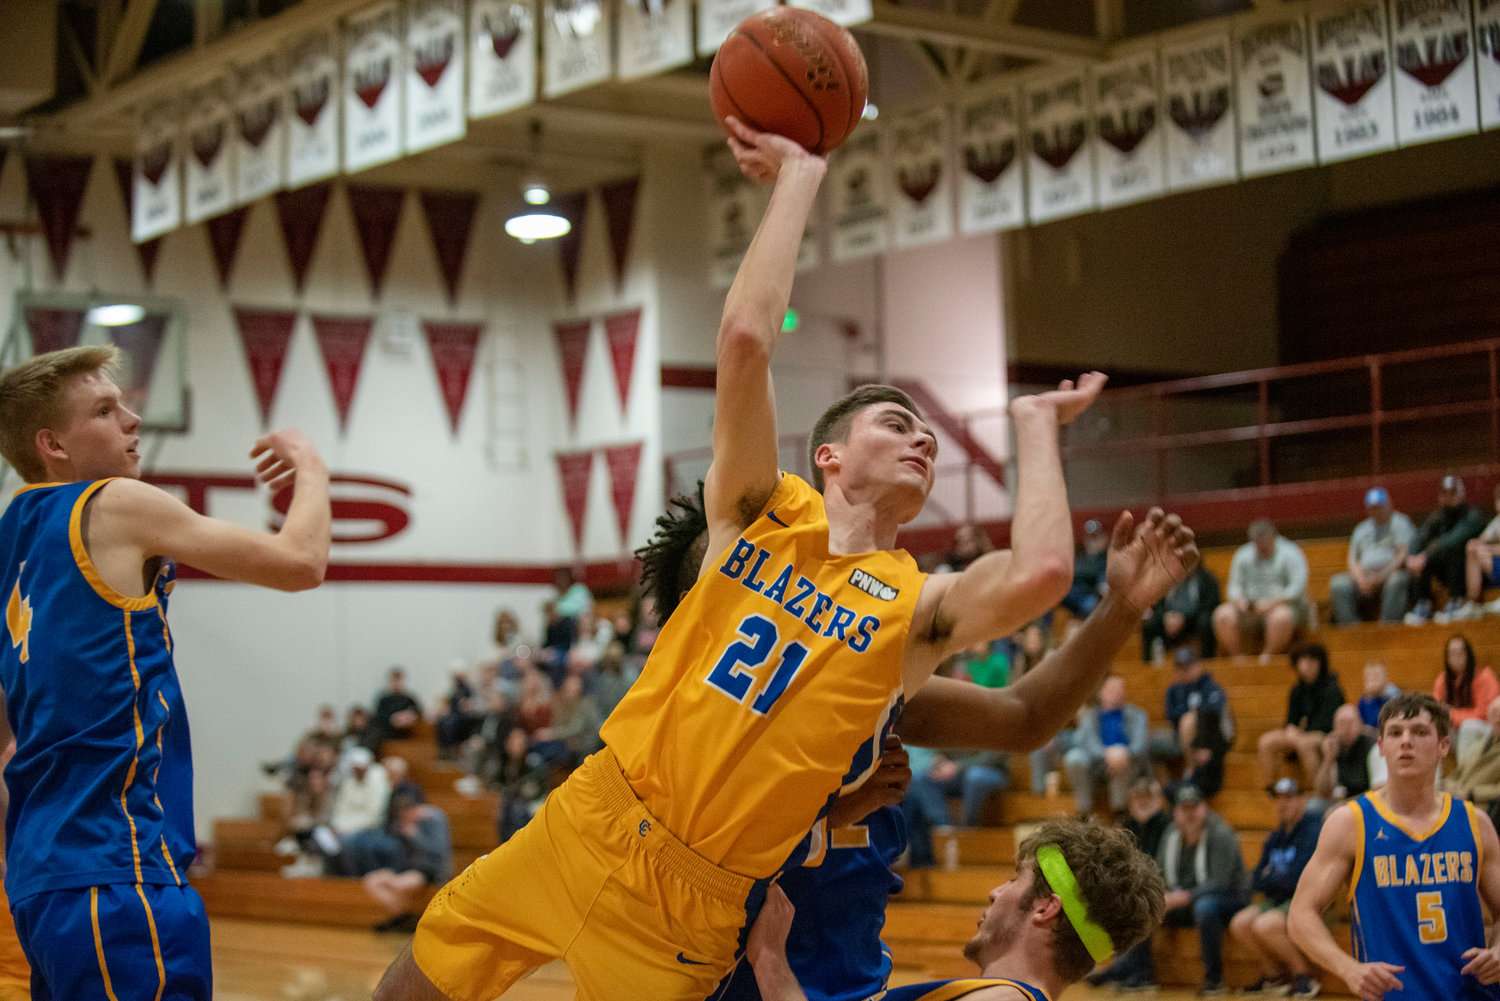 Centralia's Landon Kaut (21) flies into the lane during the SWW Senior All-Star Game on March 26.